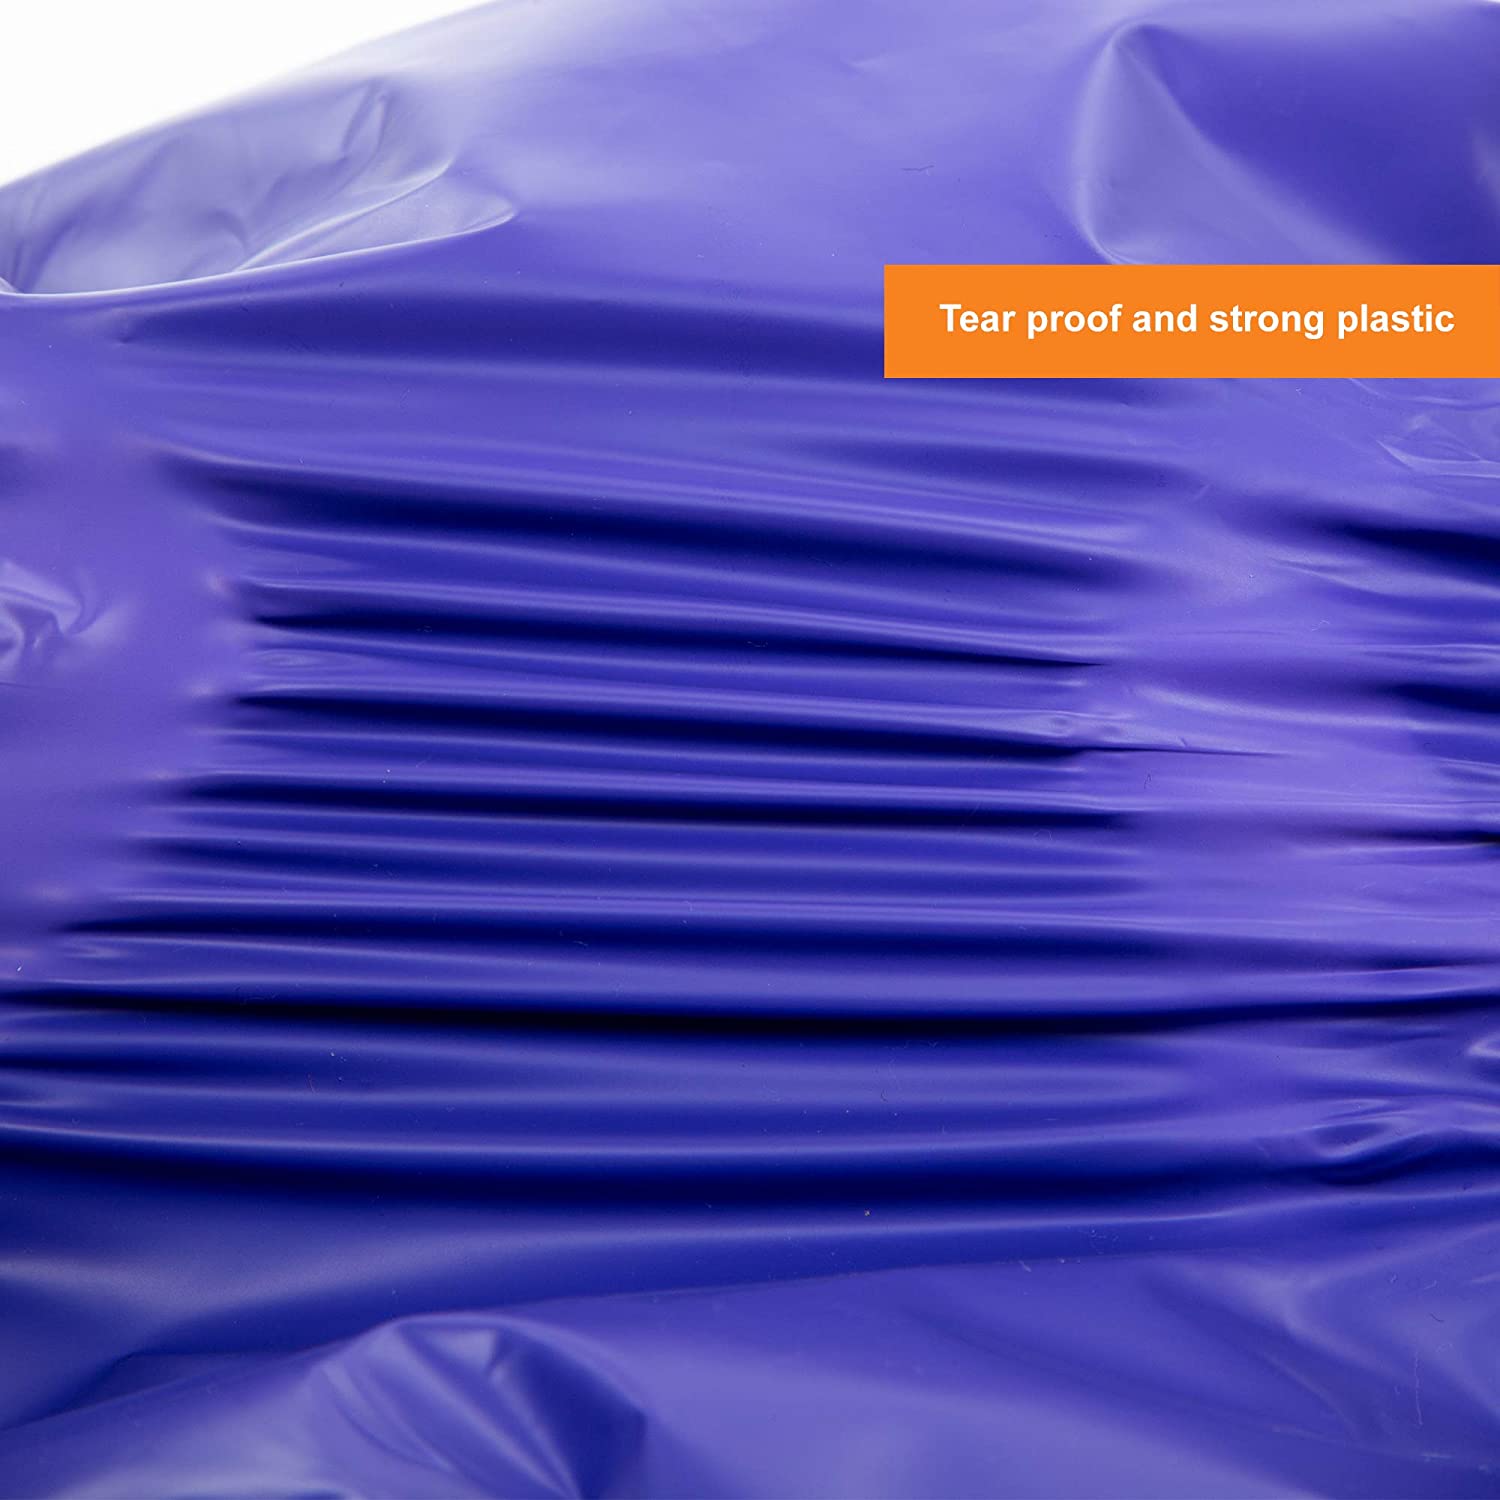 6x9 Poly Mailer Shipping Bags with tear proof and strong plastic